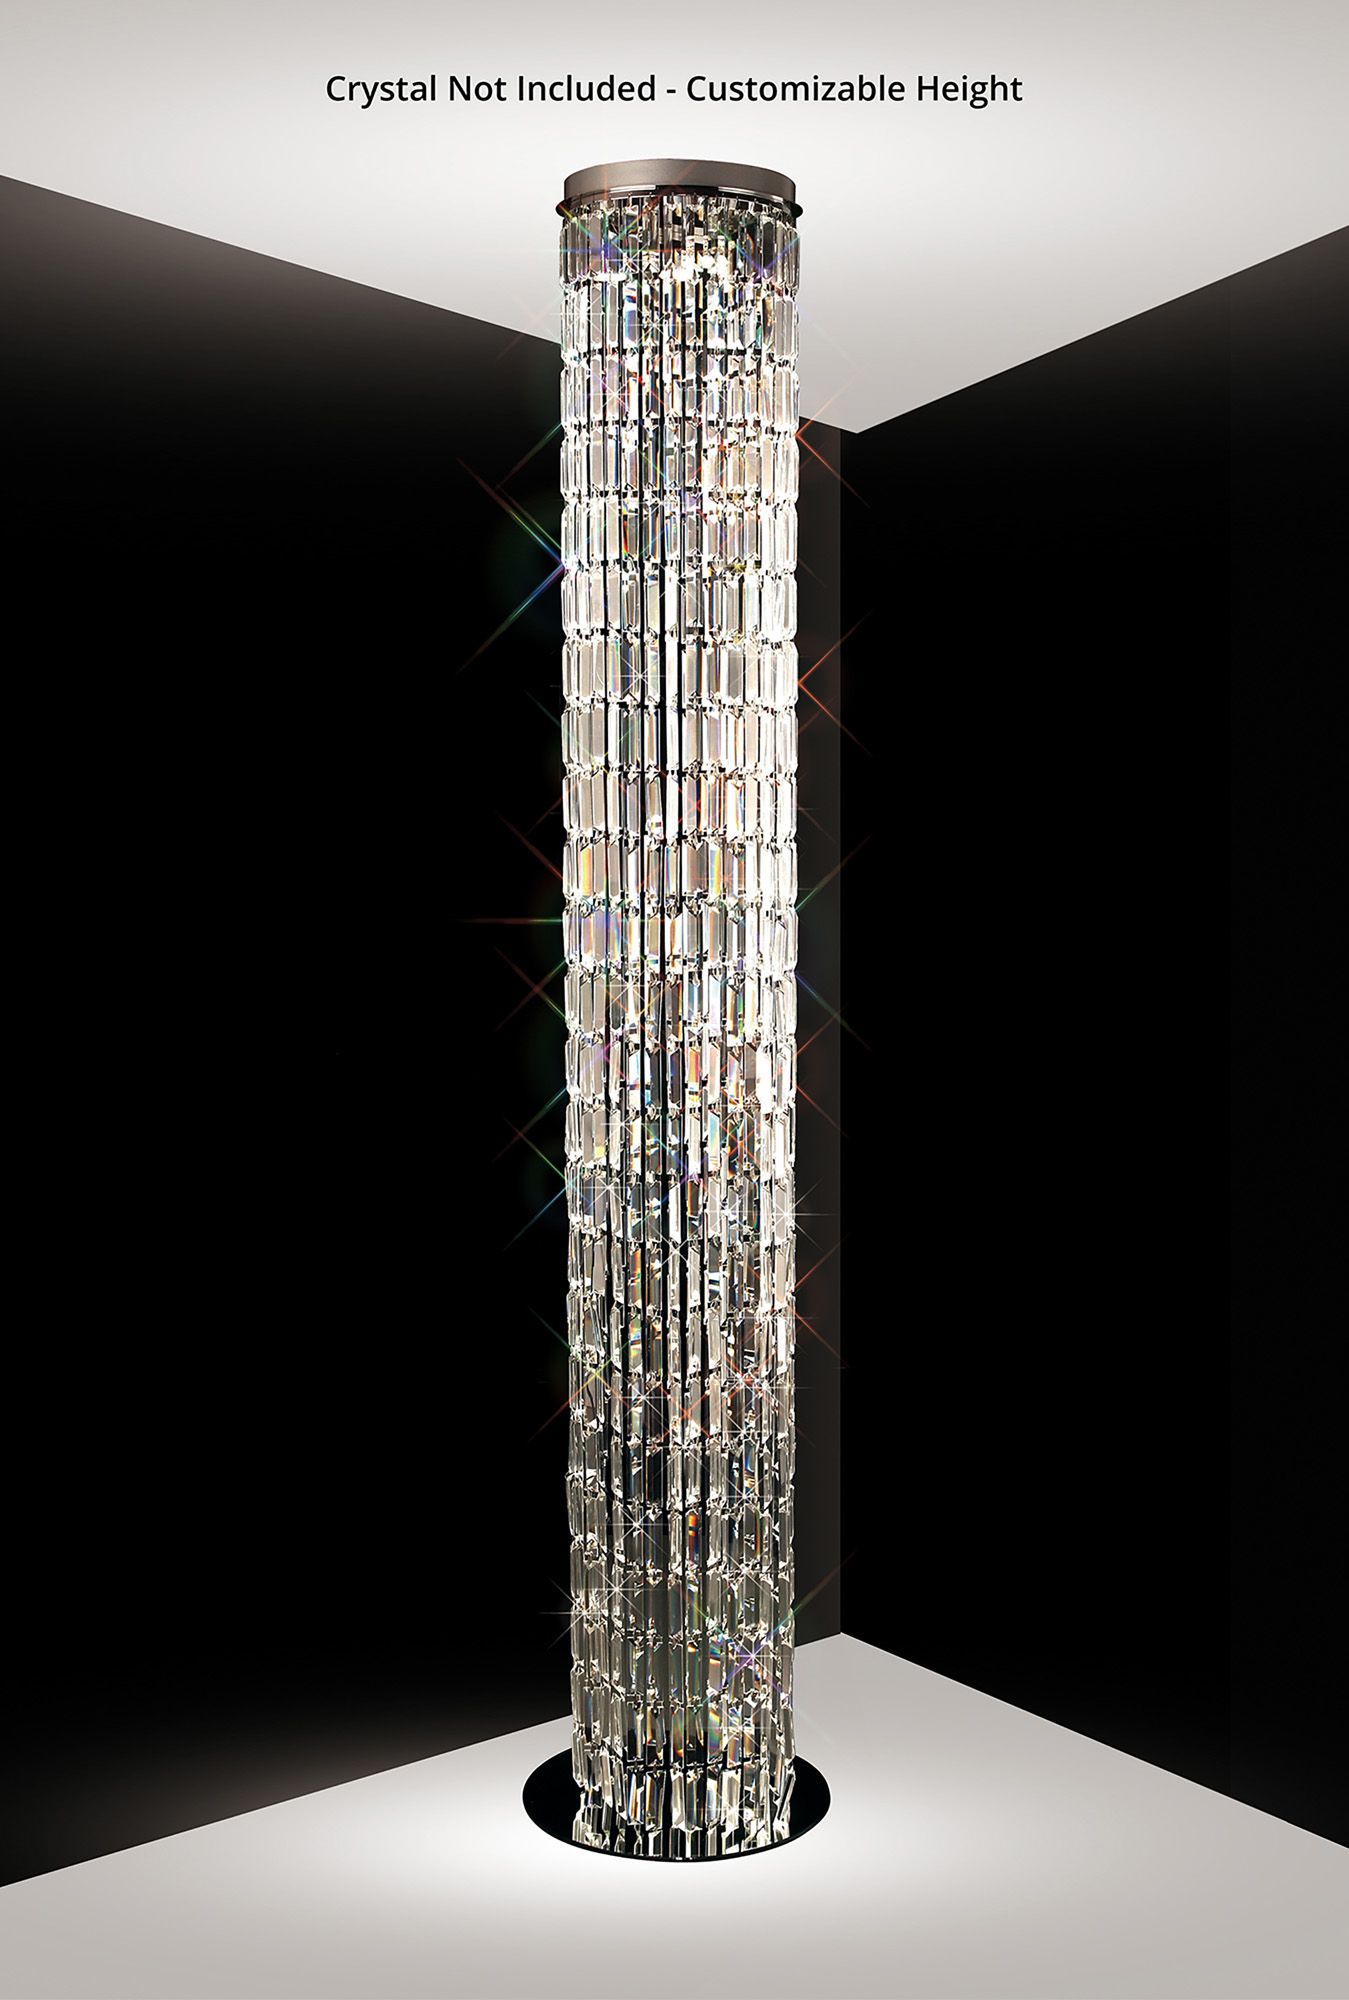 Crystal Floor Lamps Modern Crystal Floor Lamps Led Components – The  Inspired Lighting Llc, Dubai Uae Intended For Chrome Crystal Tower Floor Lamps (Photo 3 of 15)